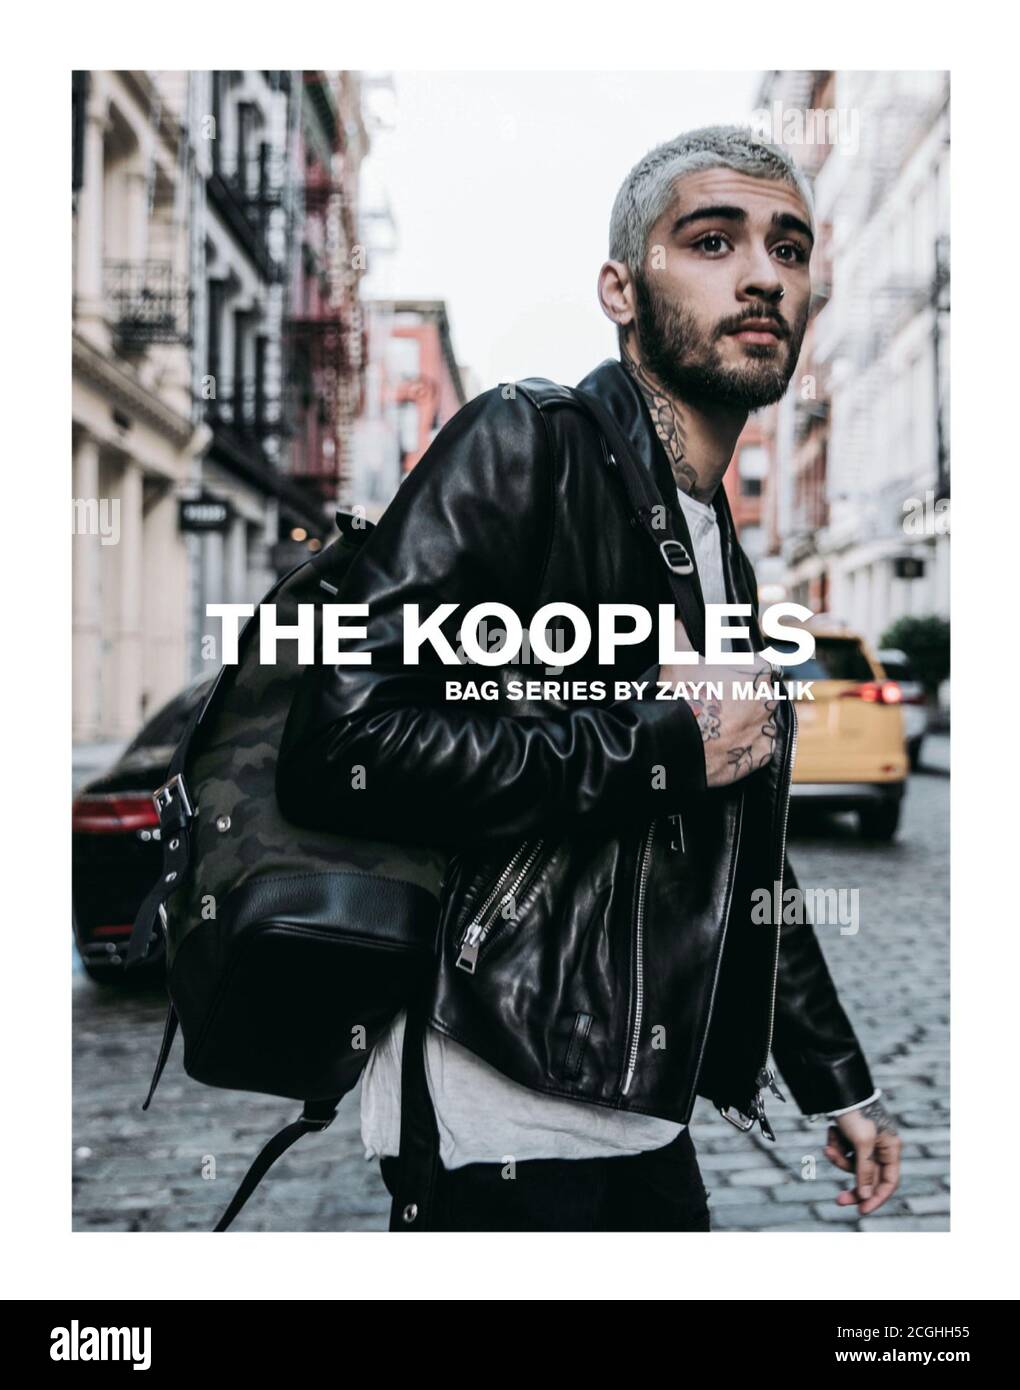 The Kooples Cut Out Stock Images ...